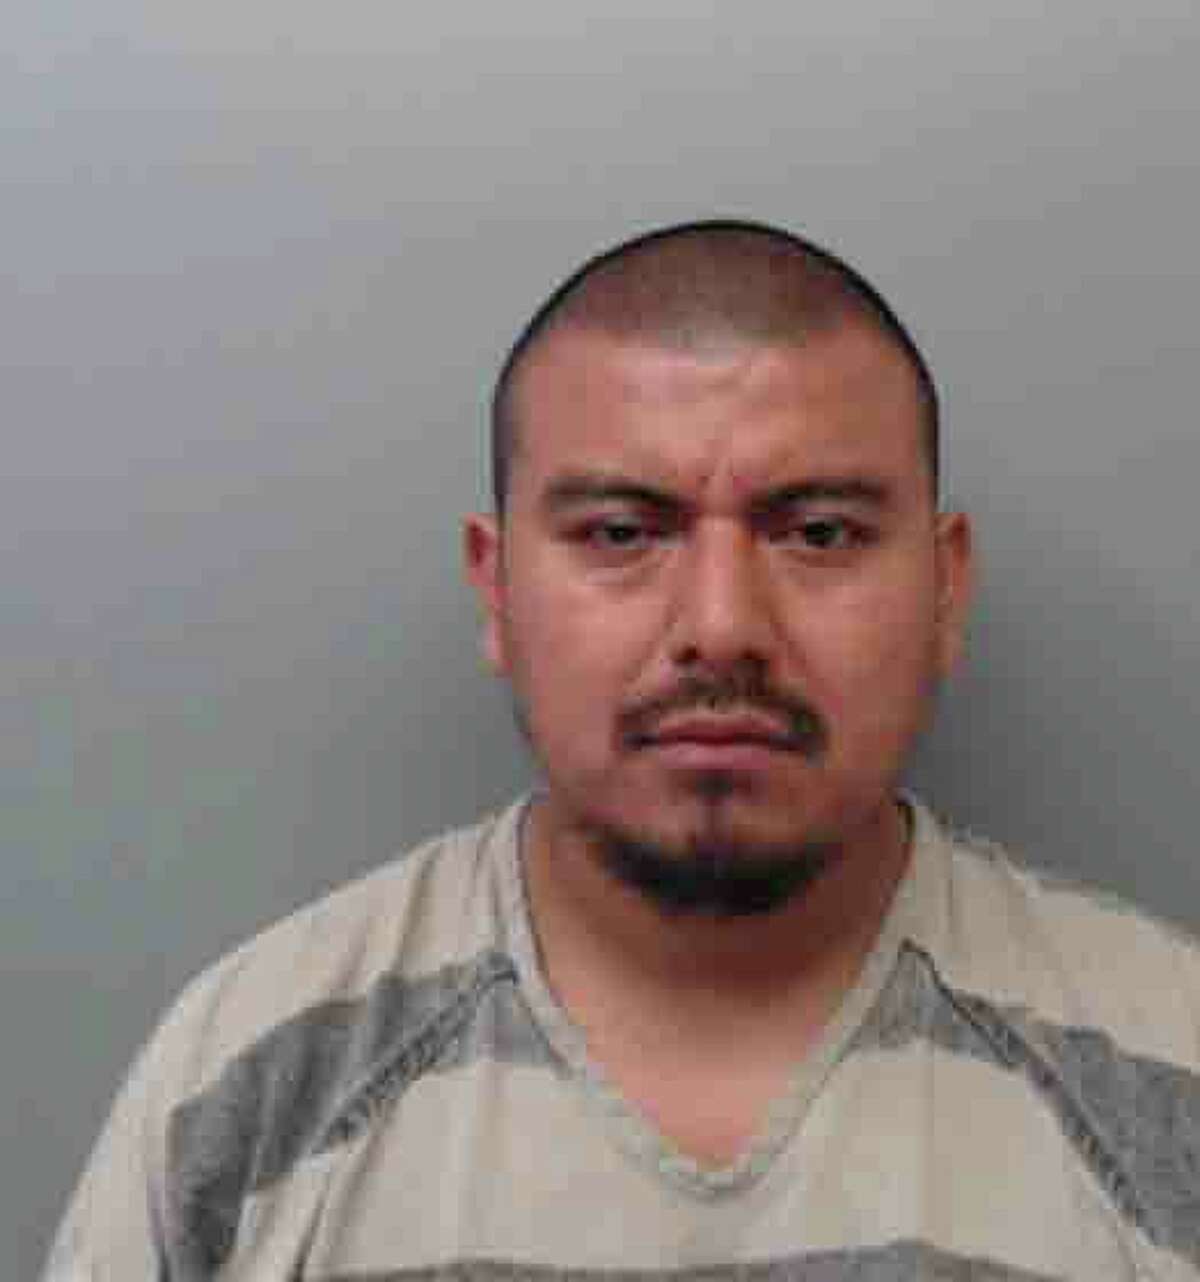 Pablo Matias Lopez, 32, was arrested and charged with assault, family violence.